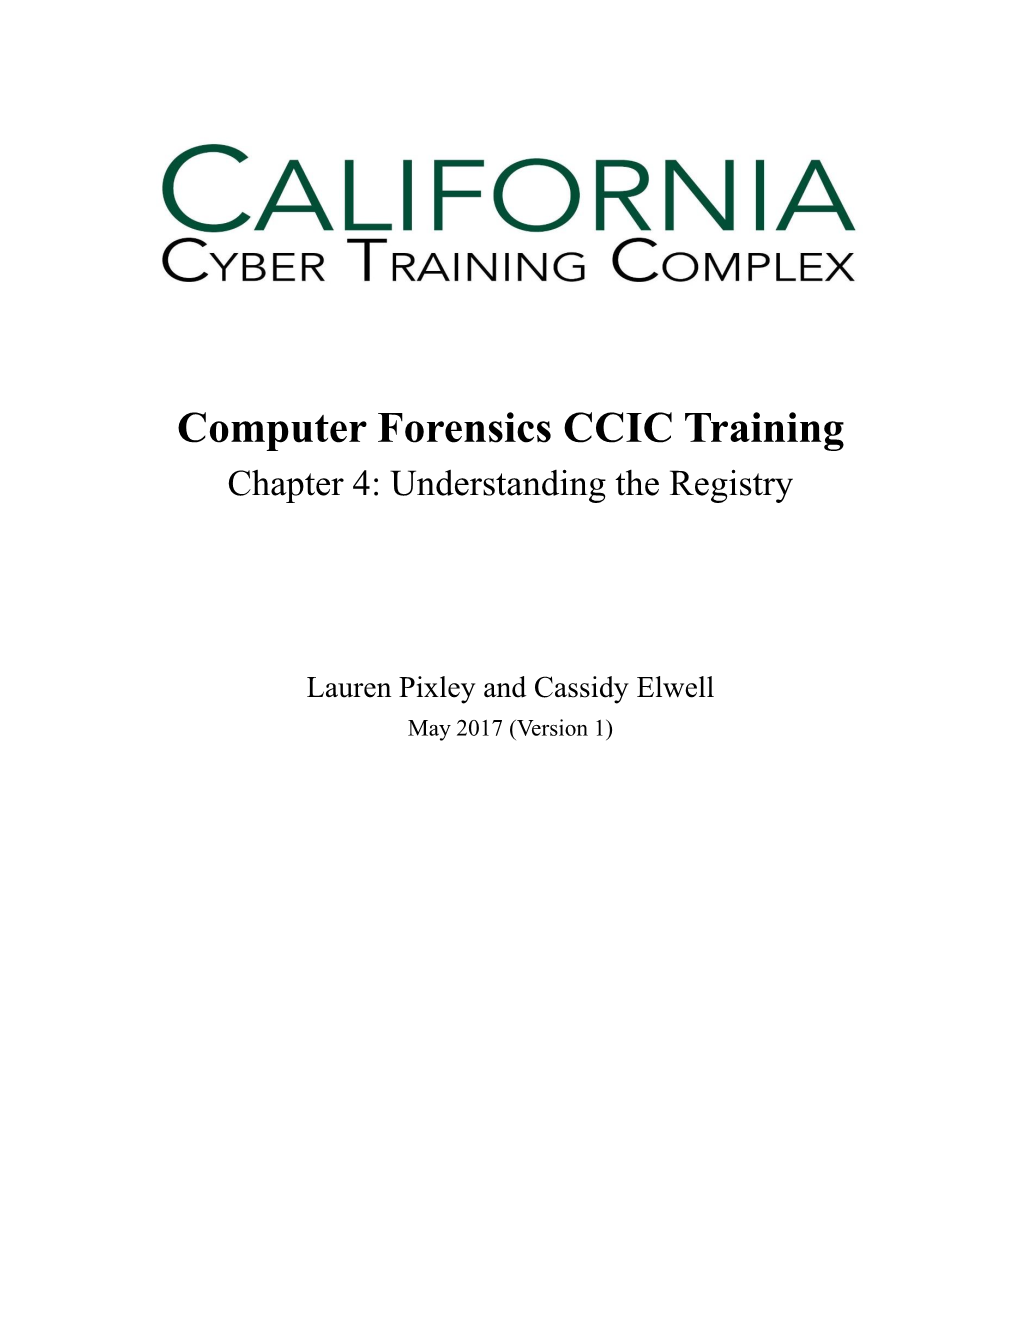 Computer Forensics CCIC Training Chapter 4: Understanding the Registry